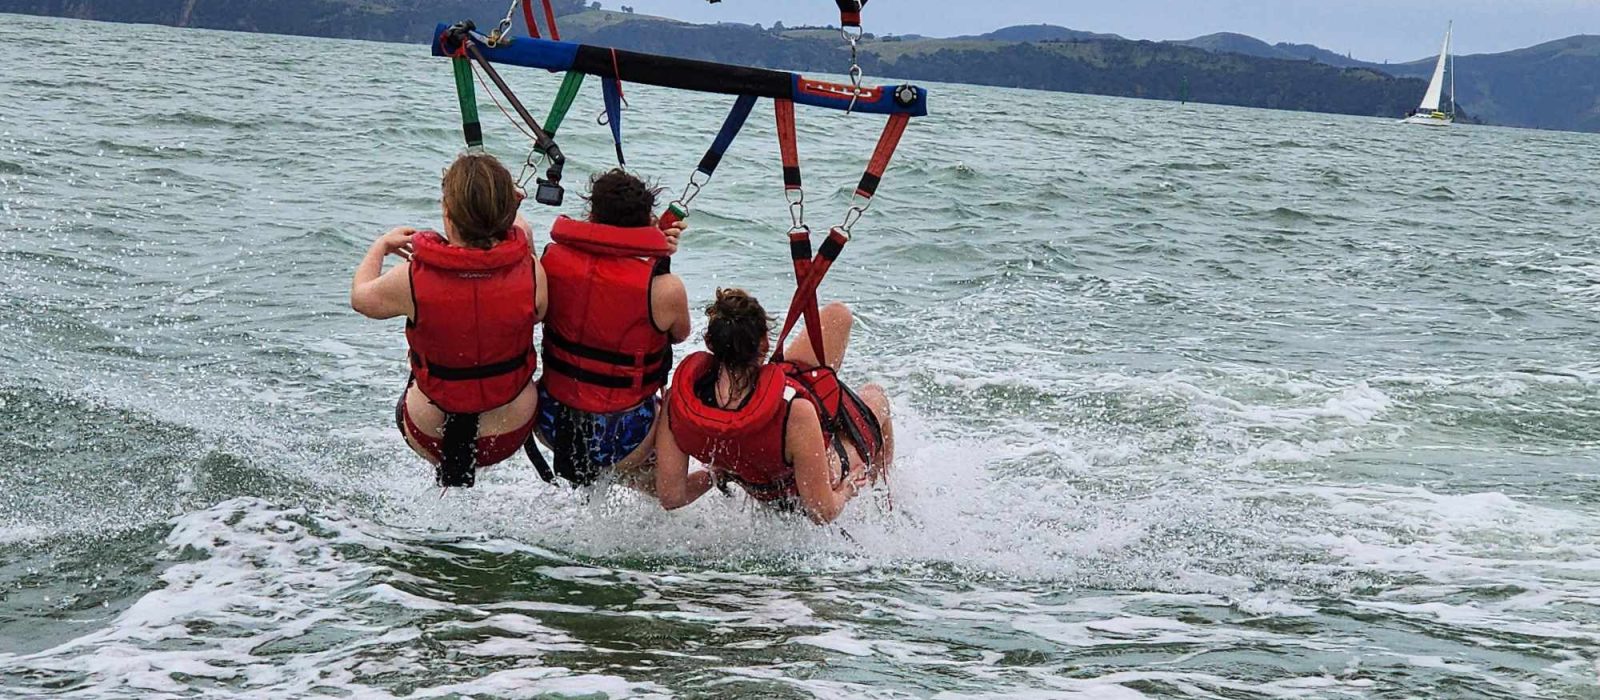 Spring into Summer in the Bay of Islands - Slide